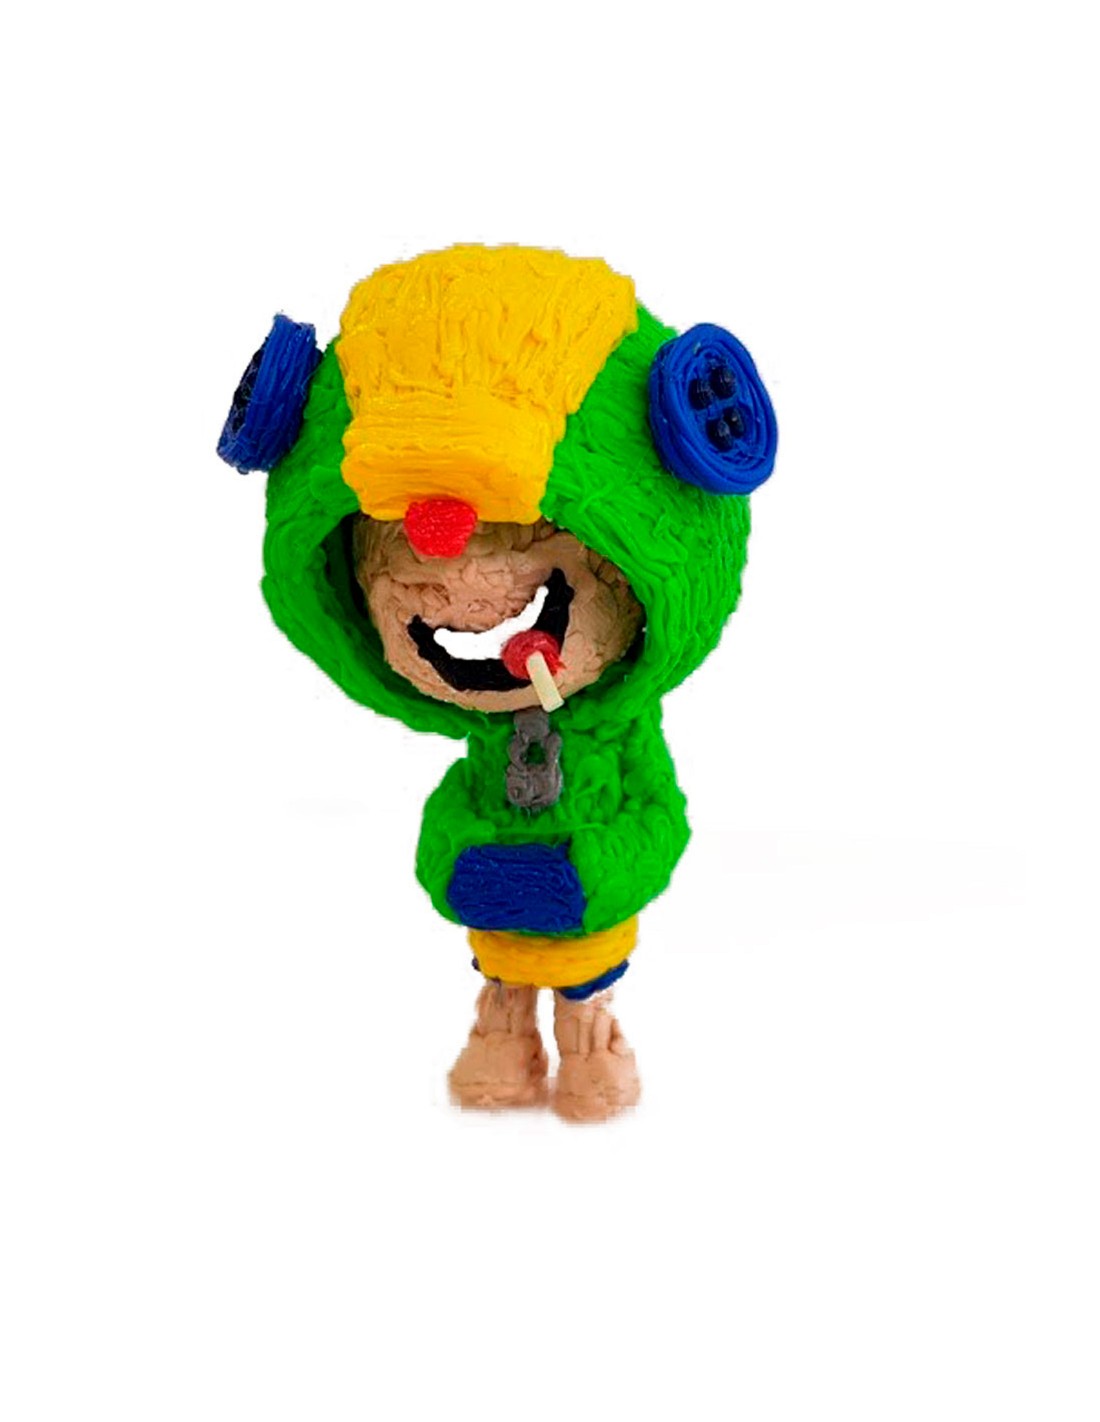 Leon From Brawl Stars Free Template For A 3d Pen - image leon brawls star